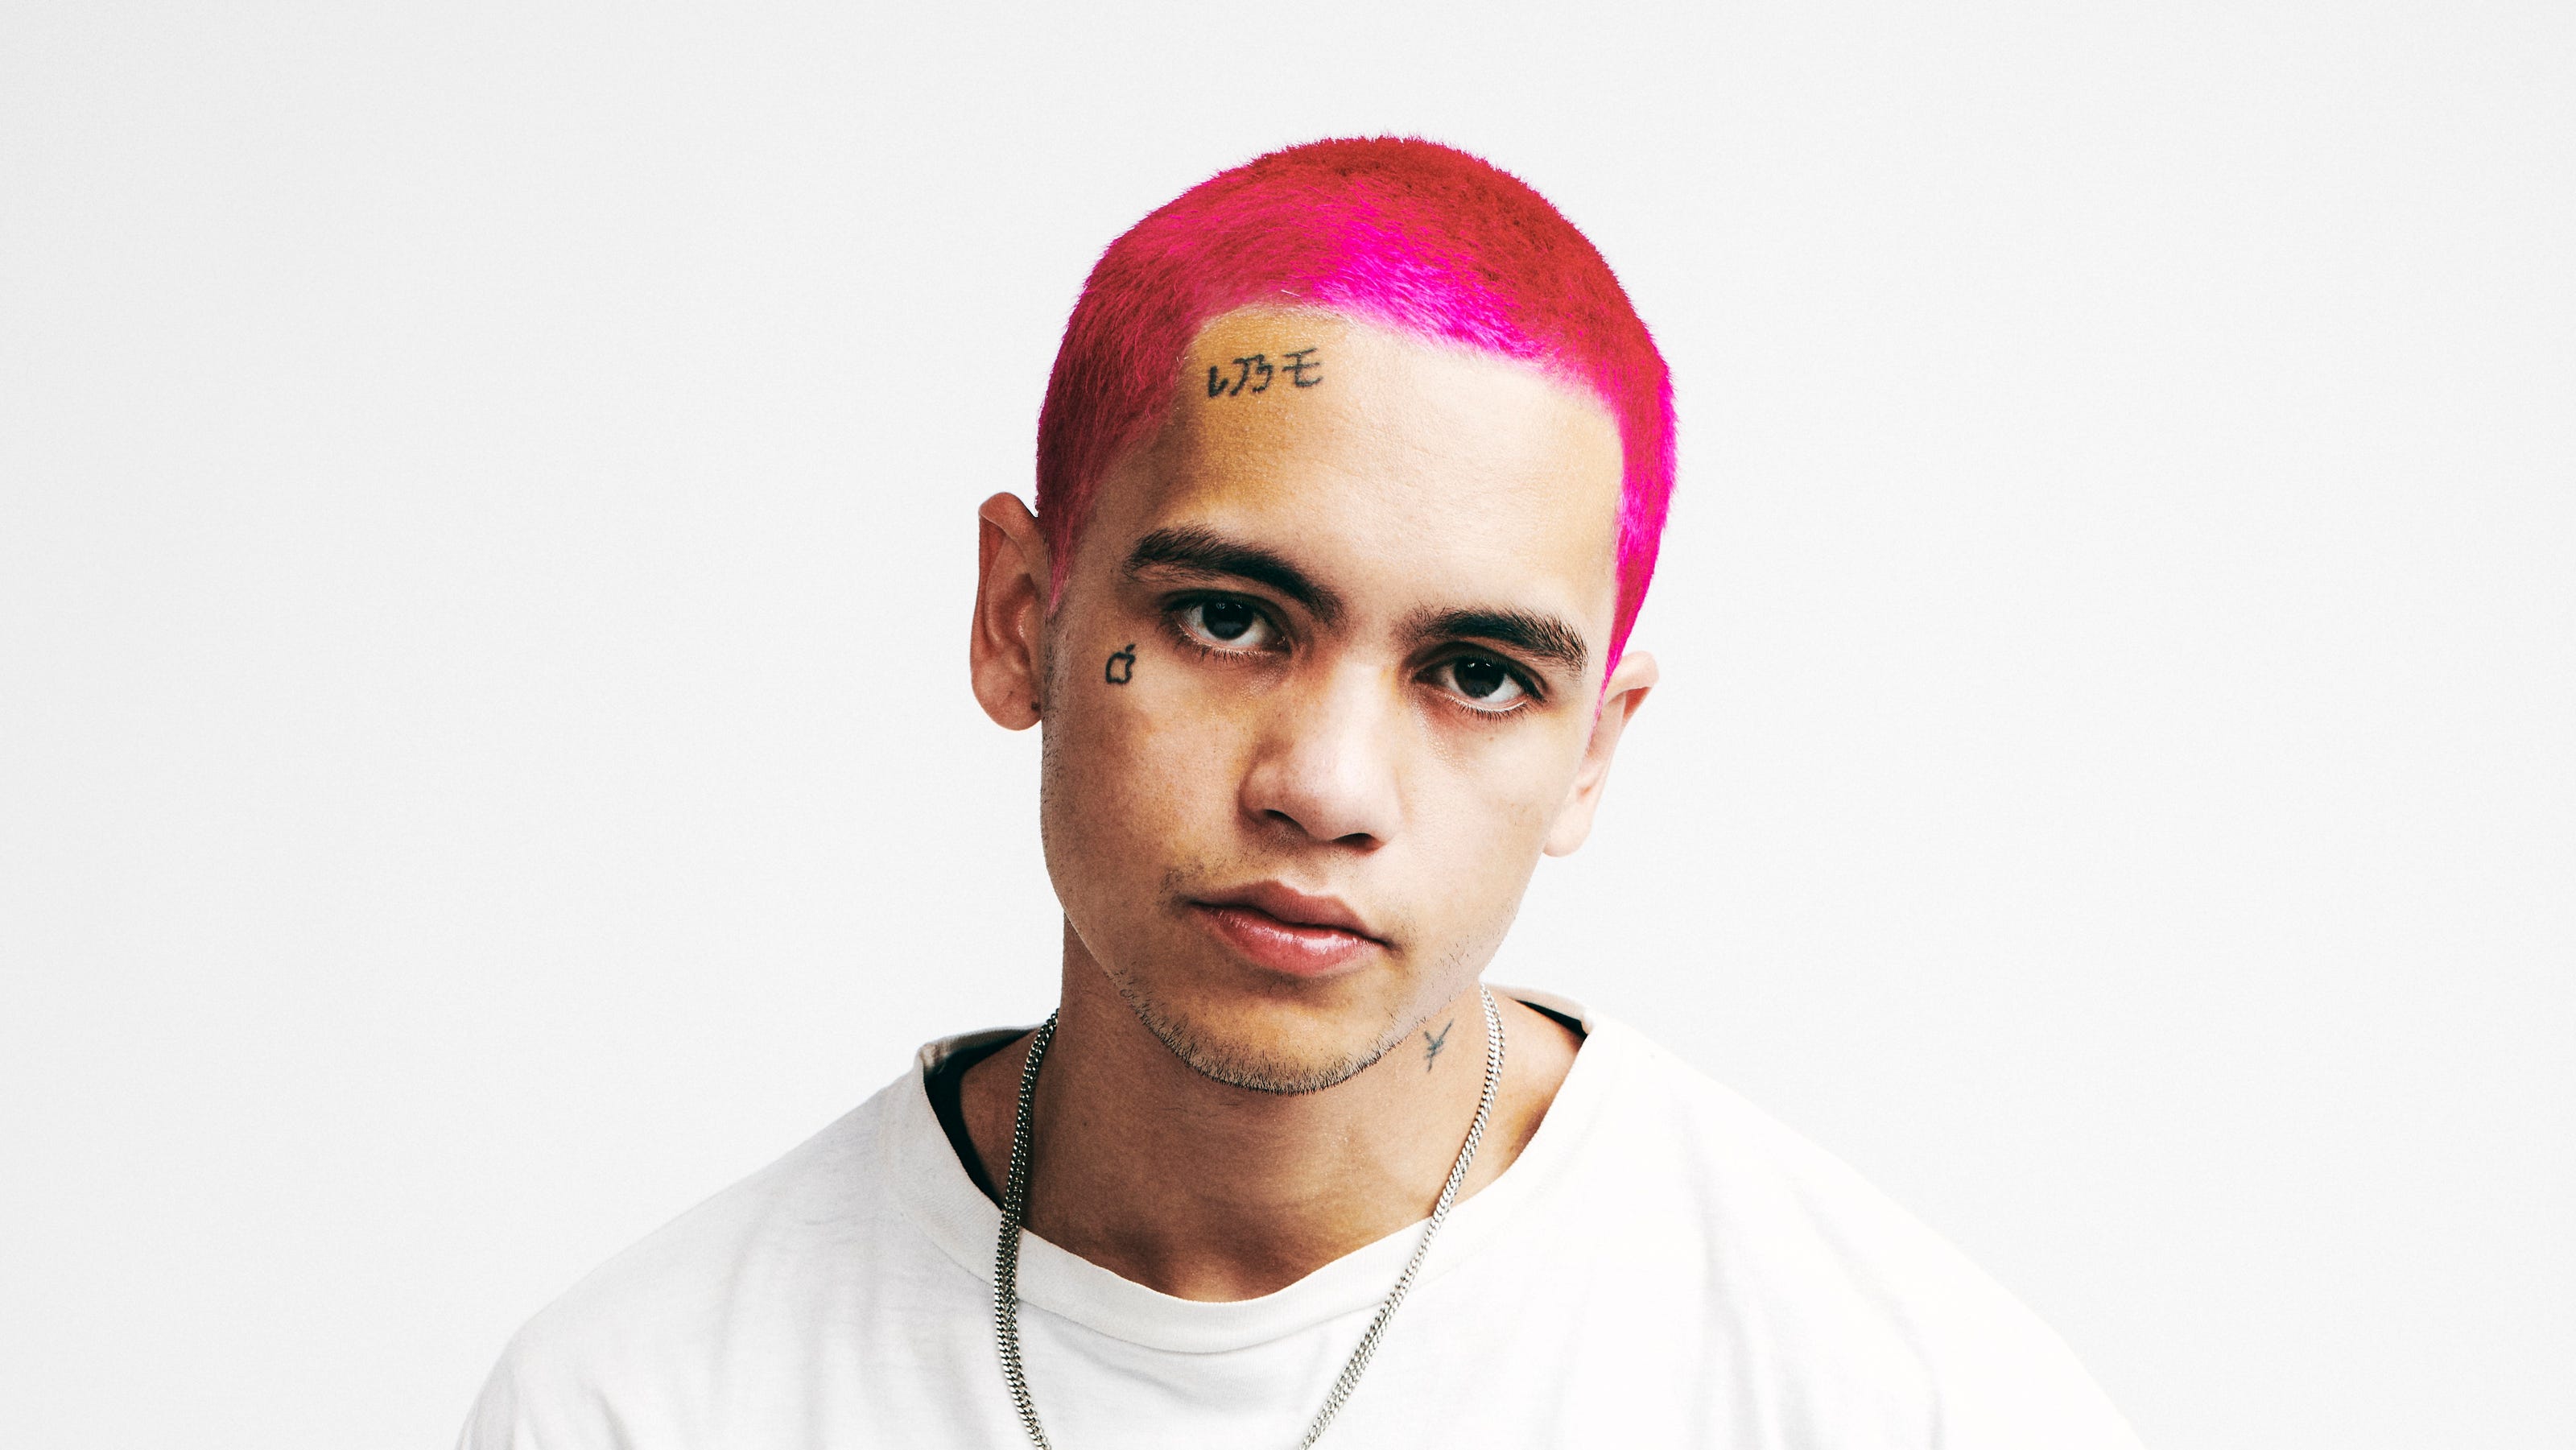 Dominic Fike interview The new album, fame and what's next